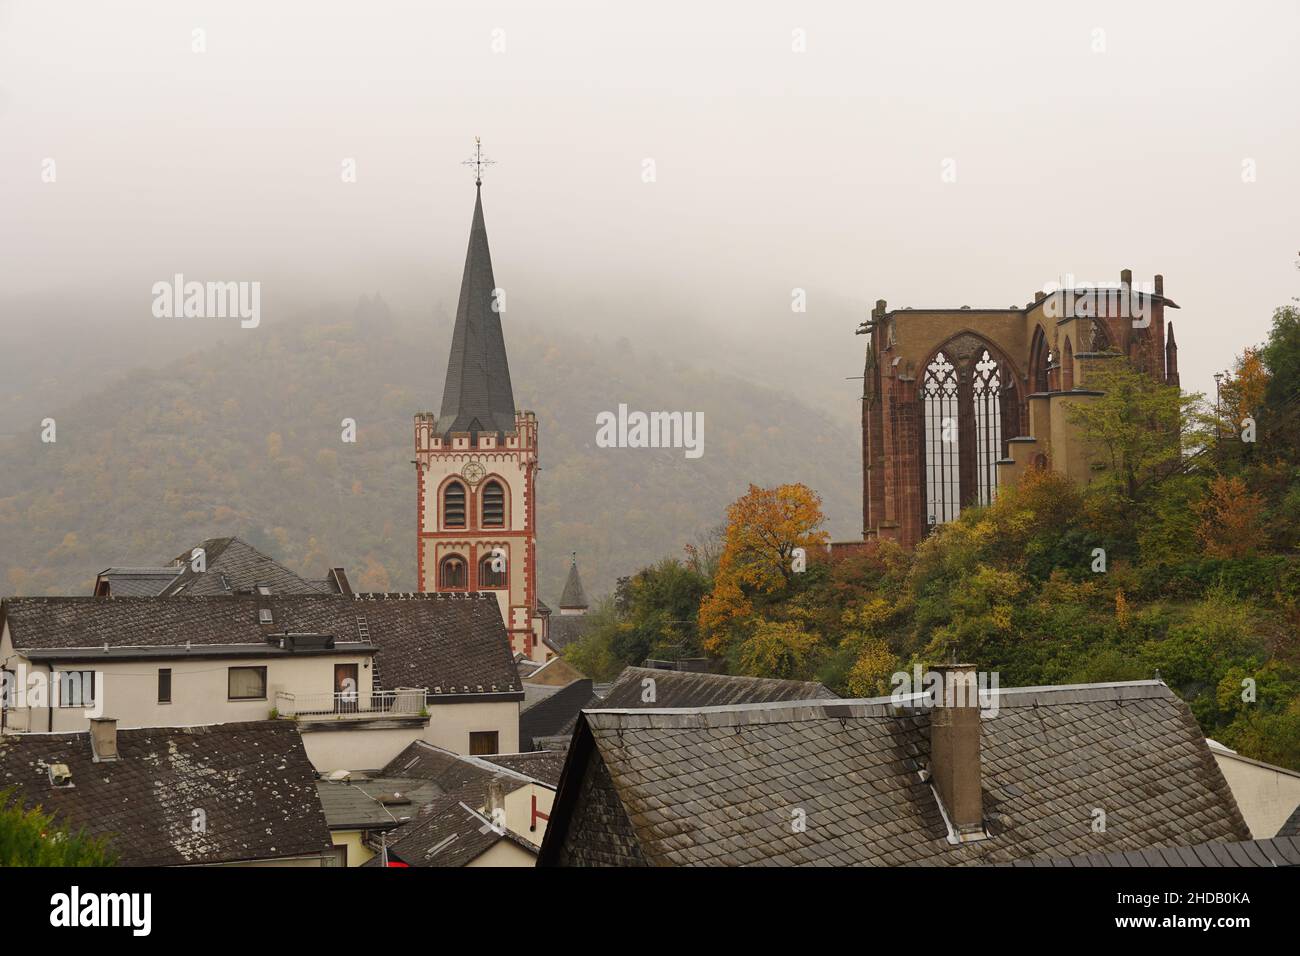 Church of St. Pete on a cloudy day in Wernerkapelle, Germany Stock Photo